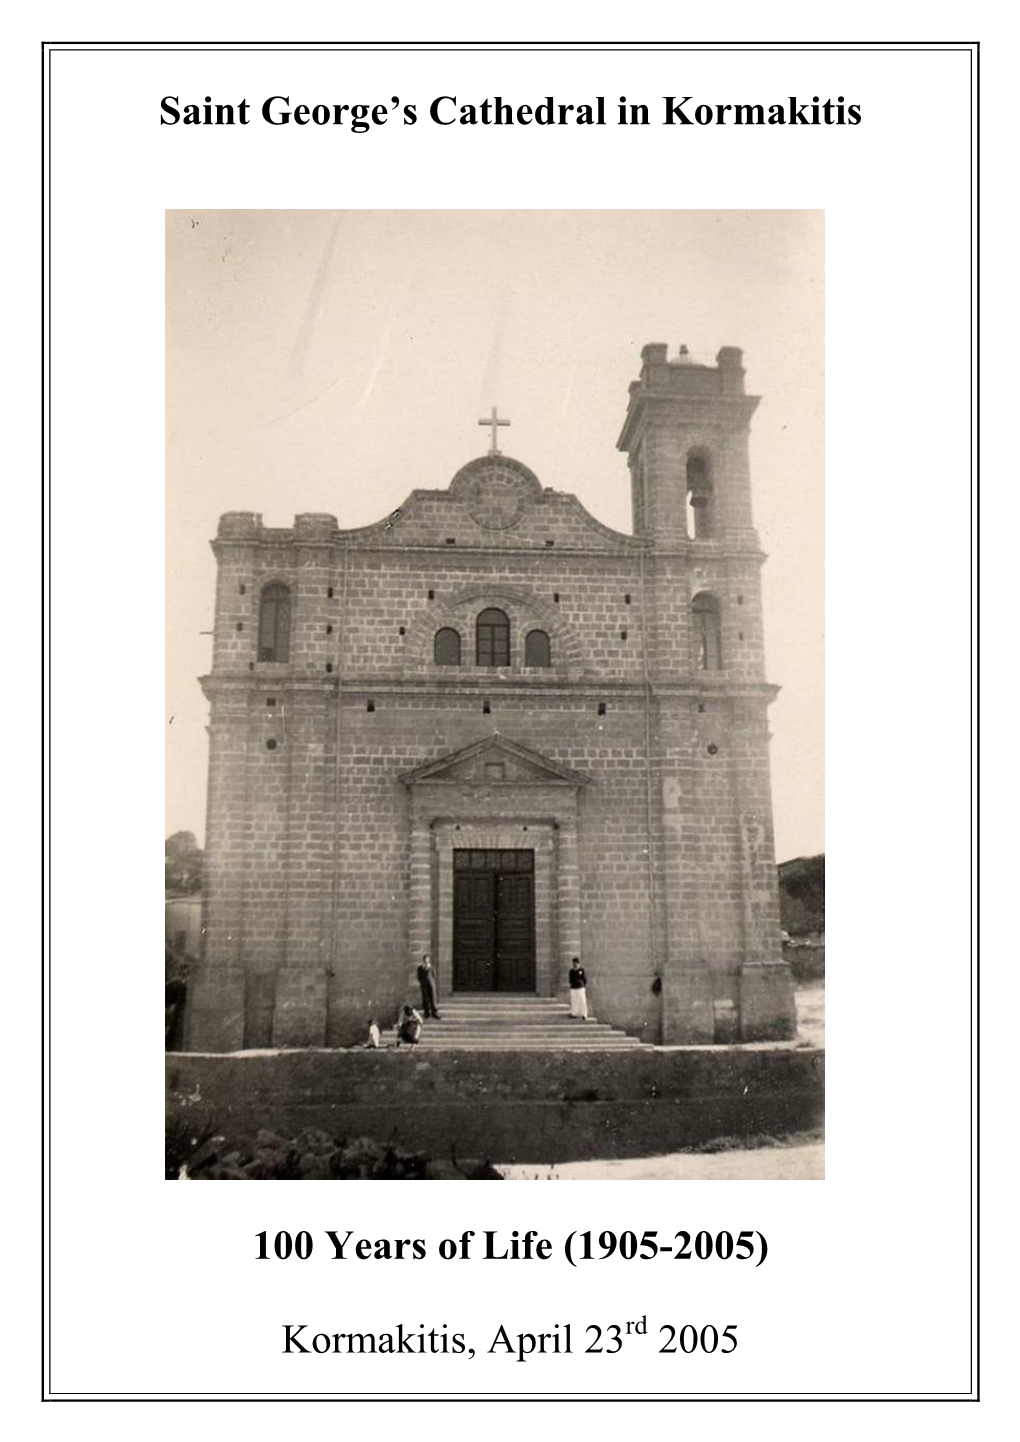 Saint George's Cathedral in Kormakitis 100 Years of Life